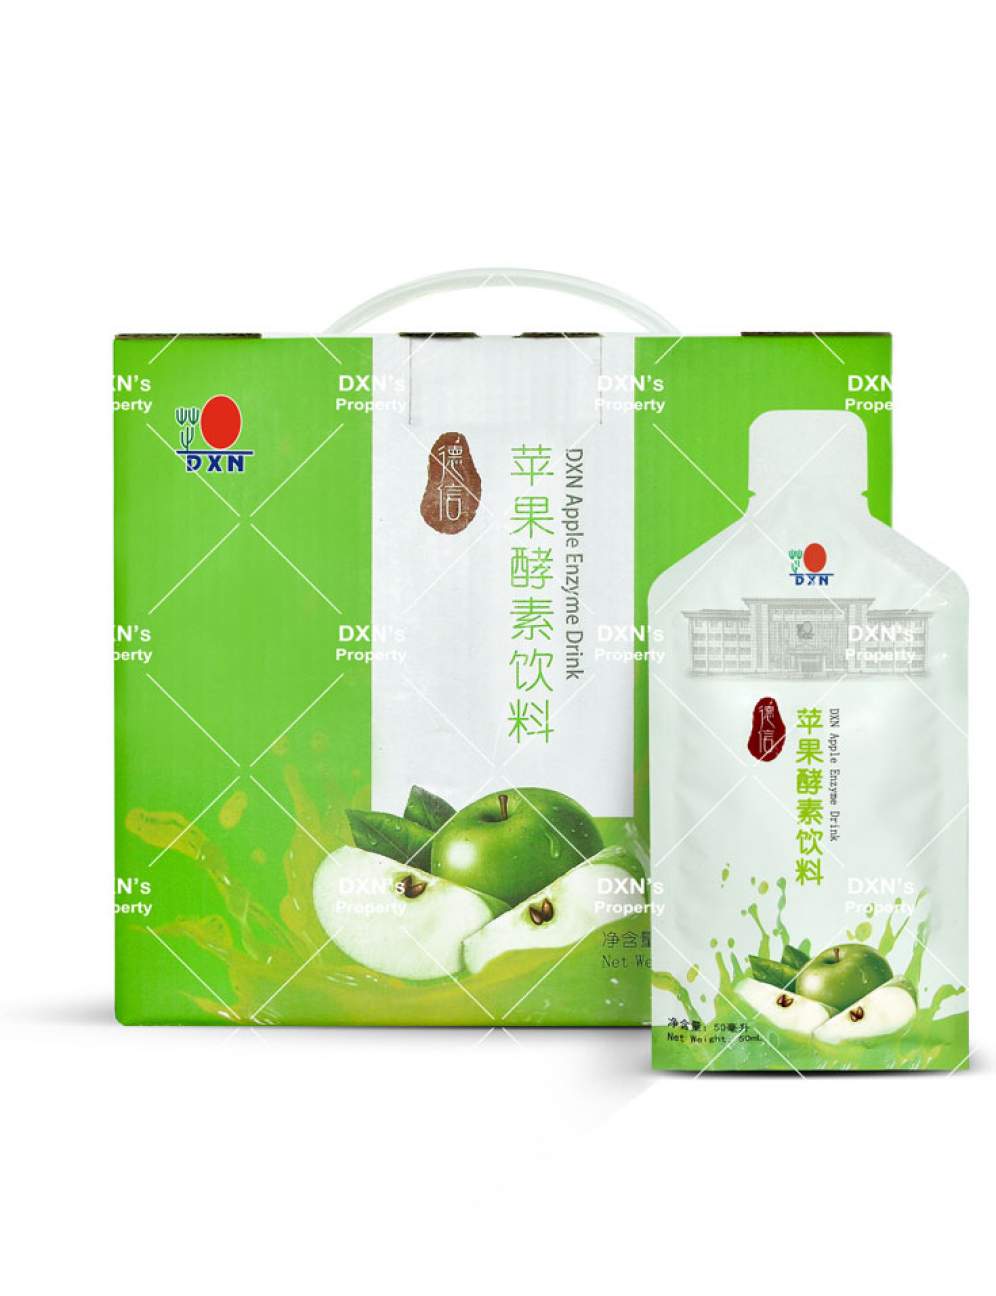 DXN Apple Enzyme Drink